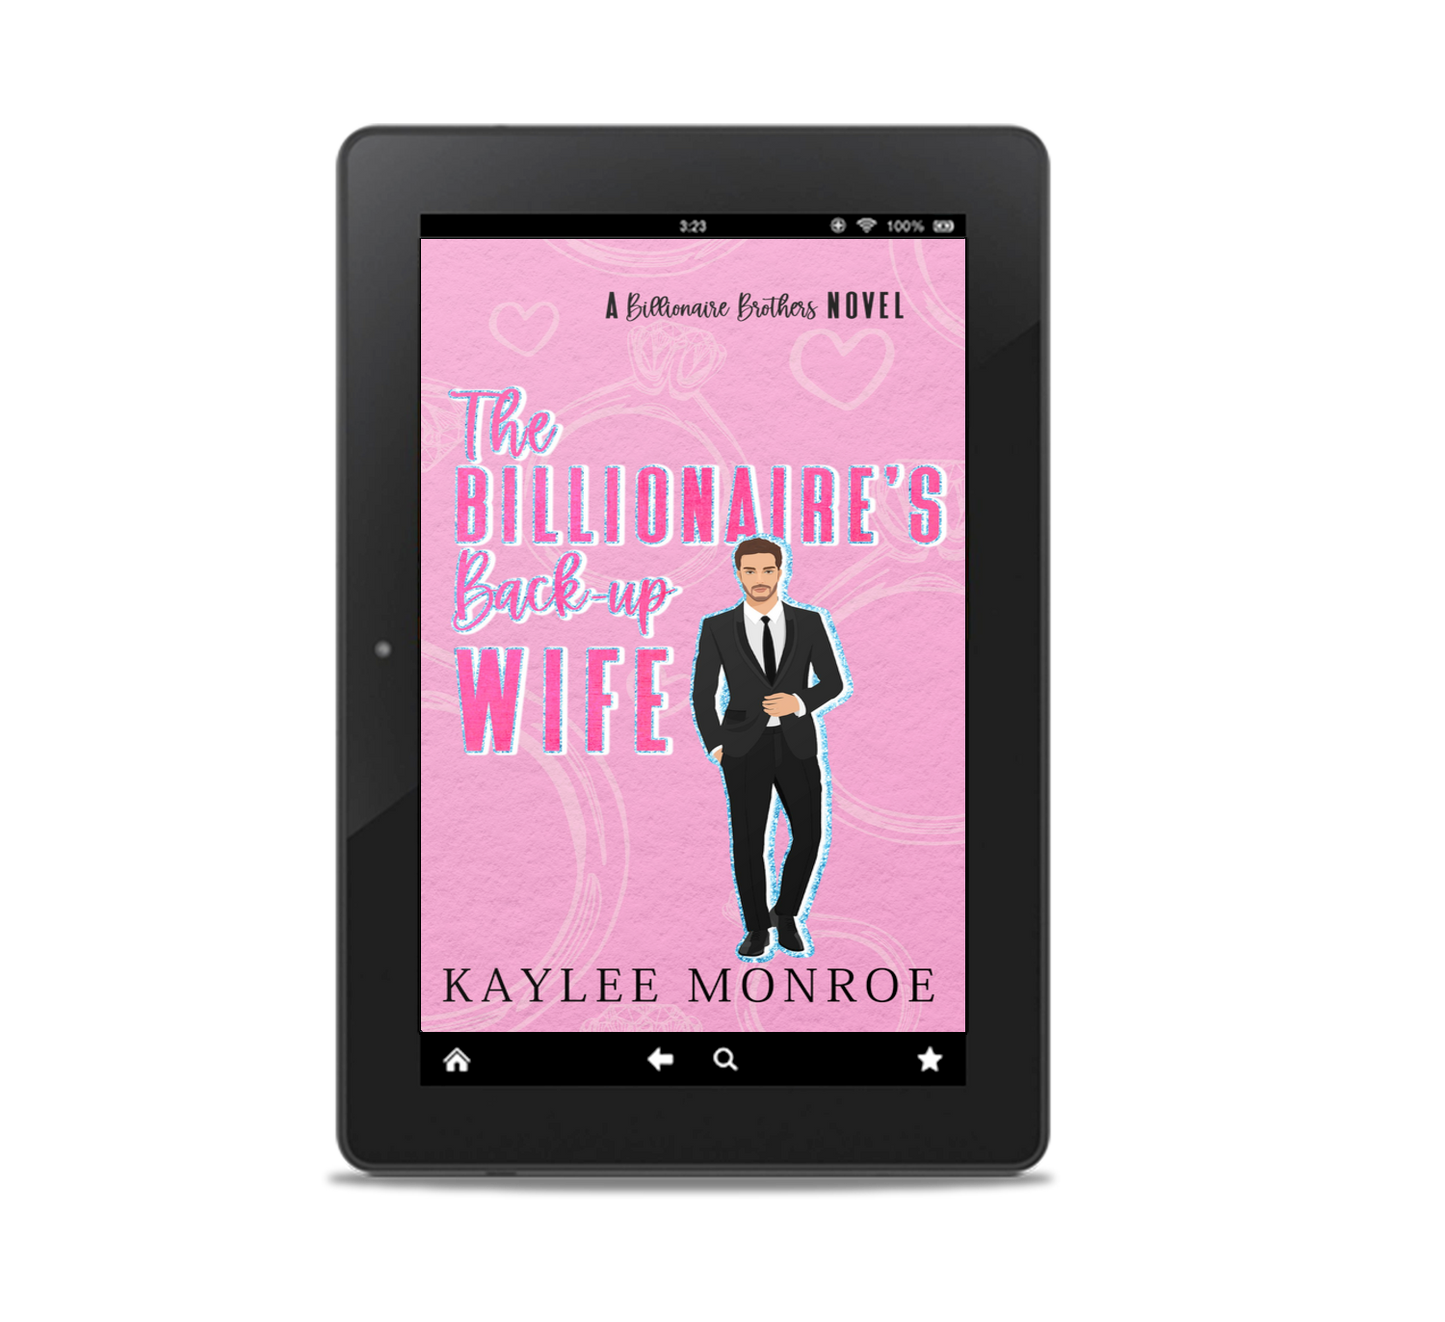 The Billionaire’s Back-up Wife